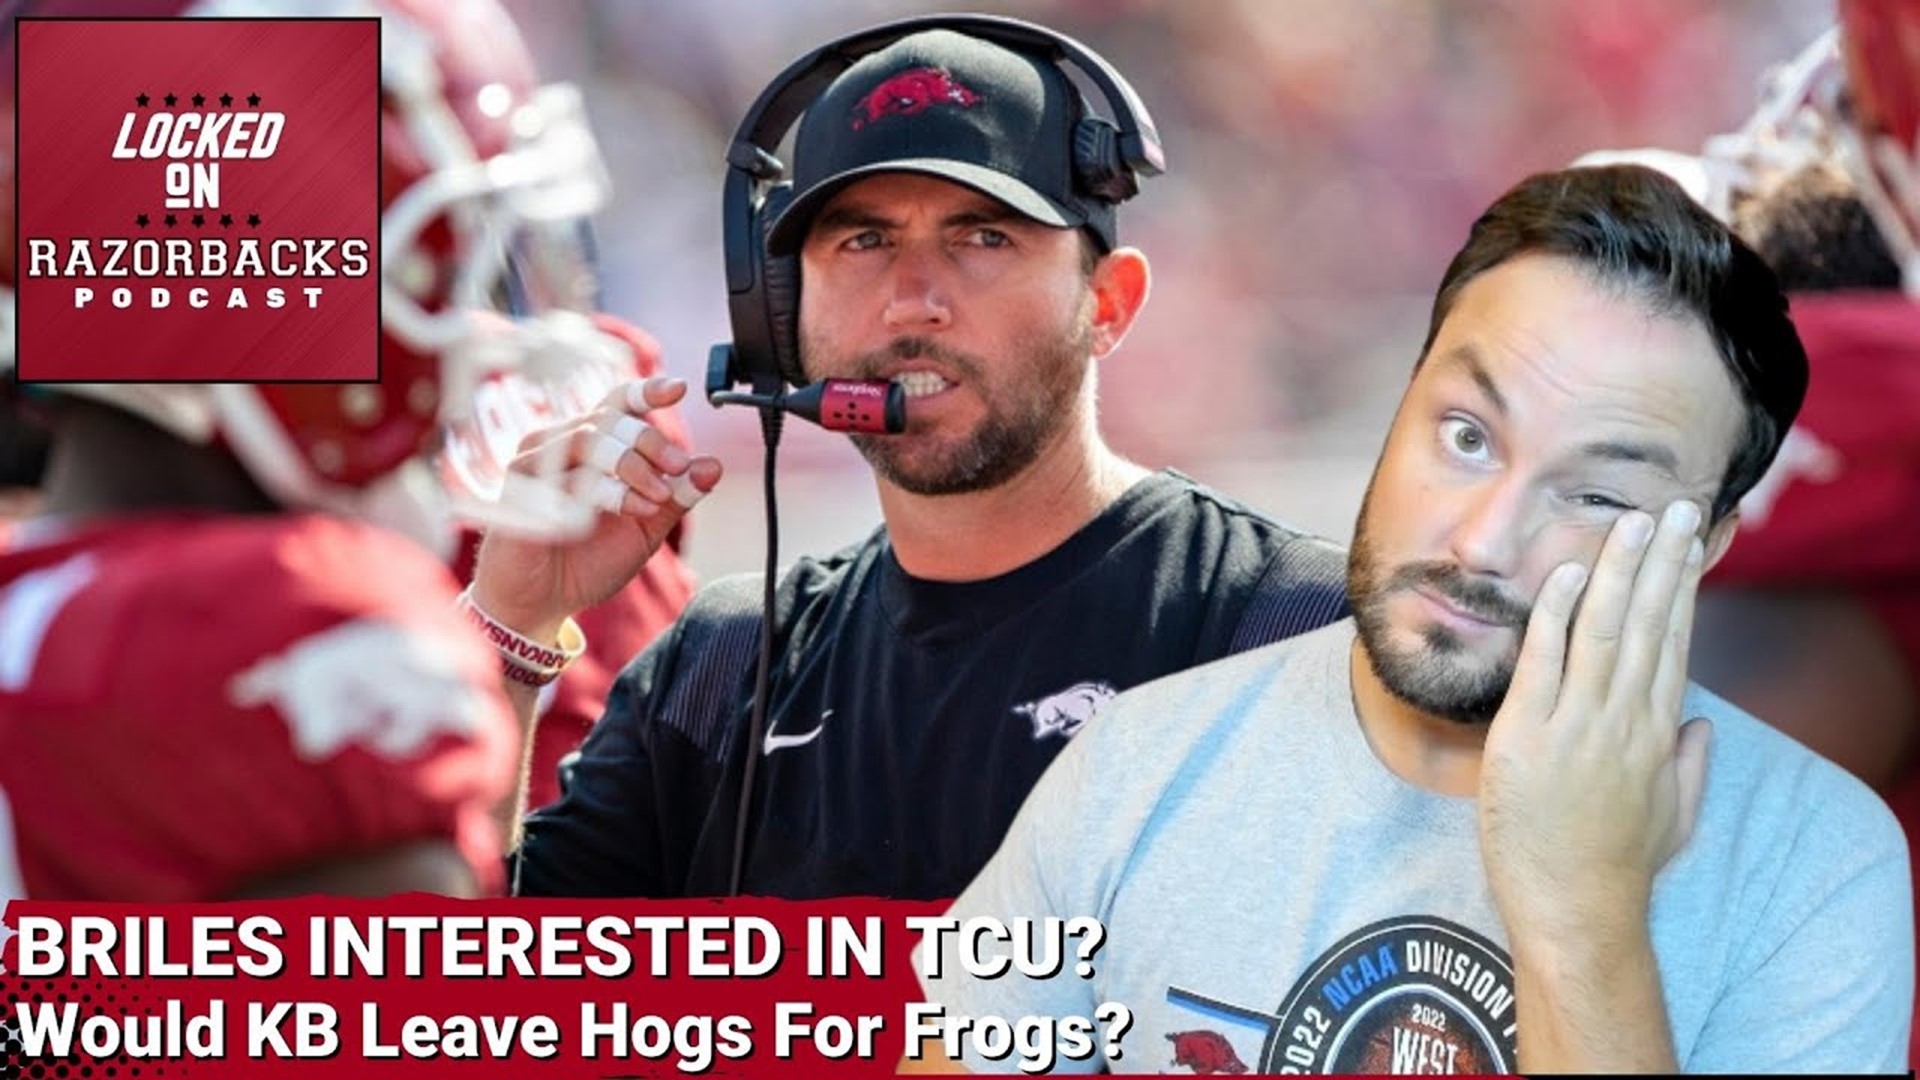 John Nabors discusses the latest rumors of Razorback Offensive Coordinator Kendall Briles being interested in the TCU OC job.